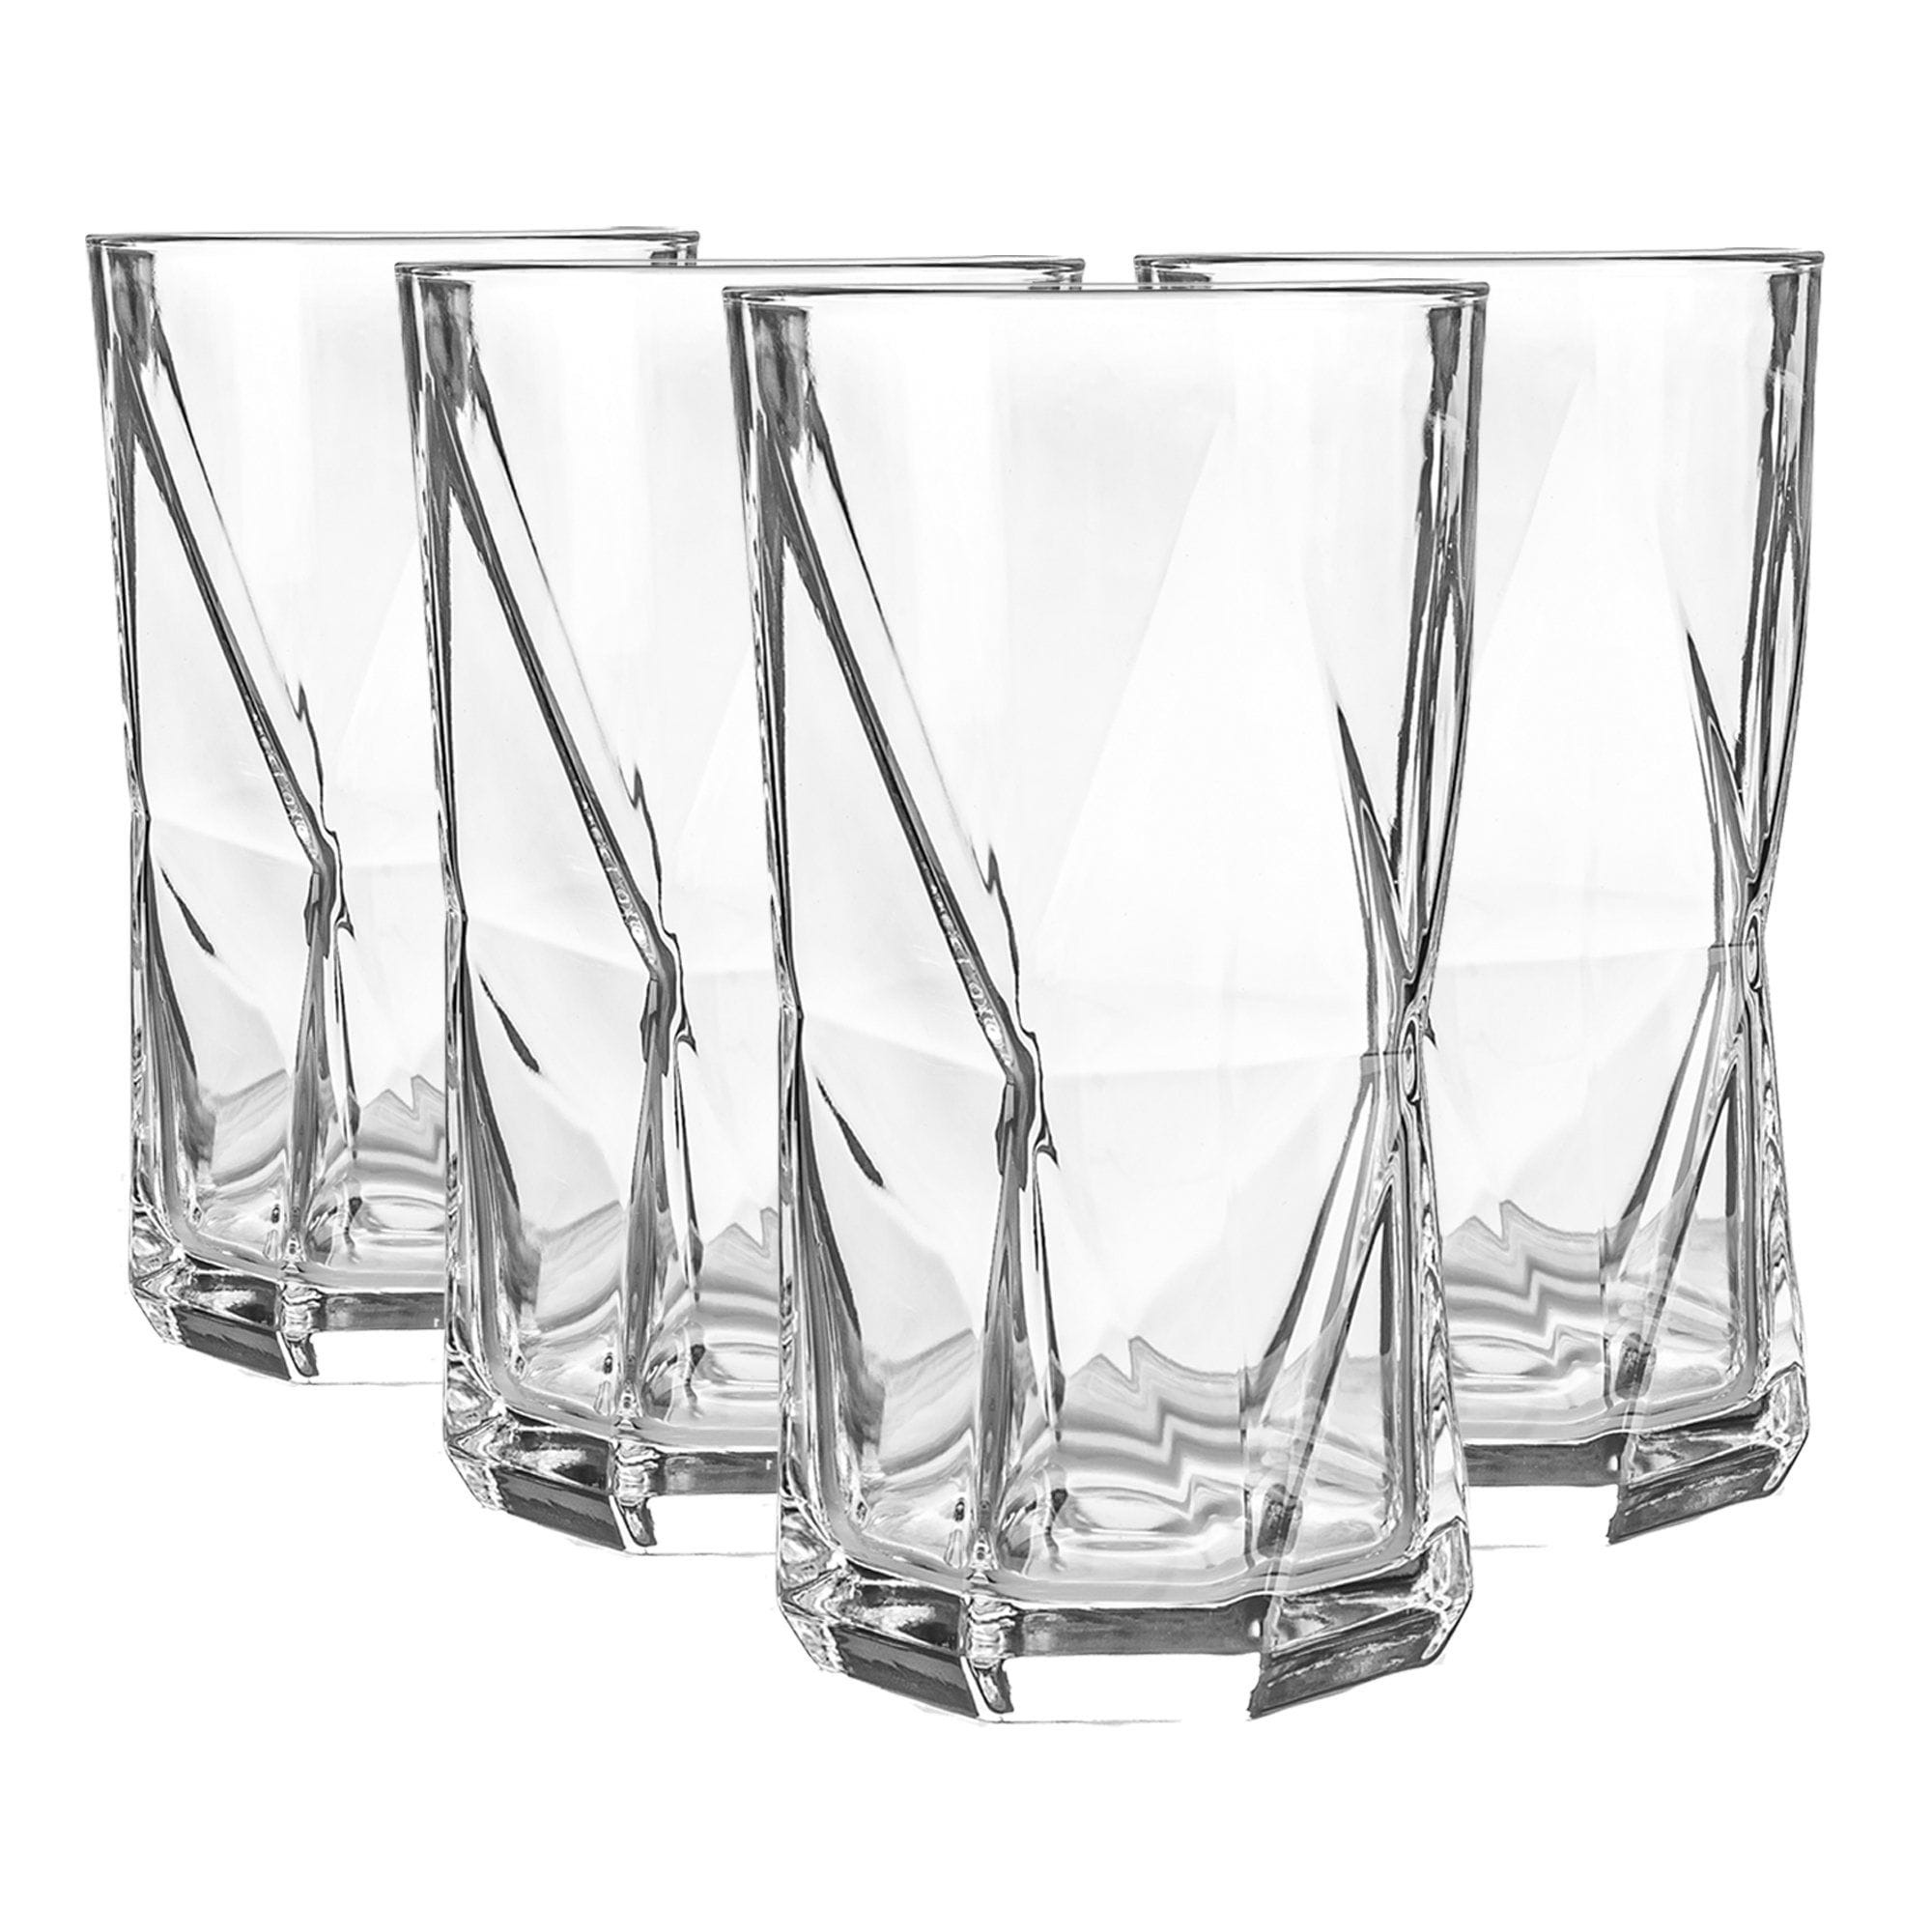 480ml Cassiopea Highball Glasses - Pack of Four - By Bormioli Rocco